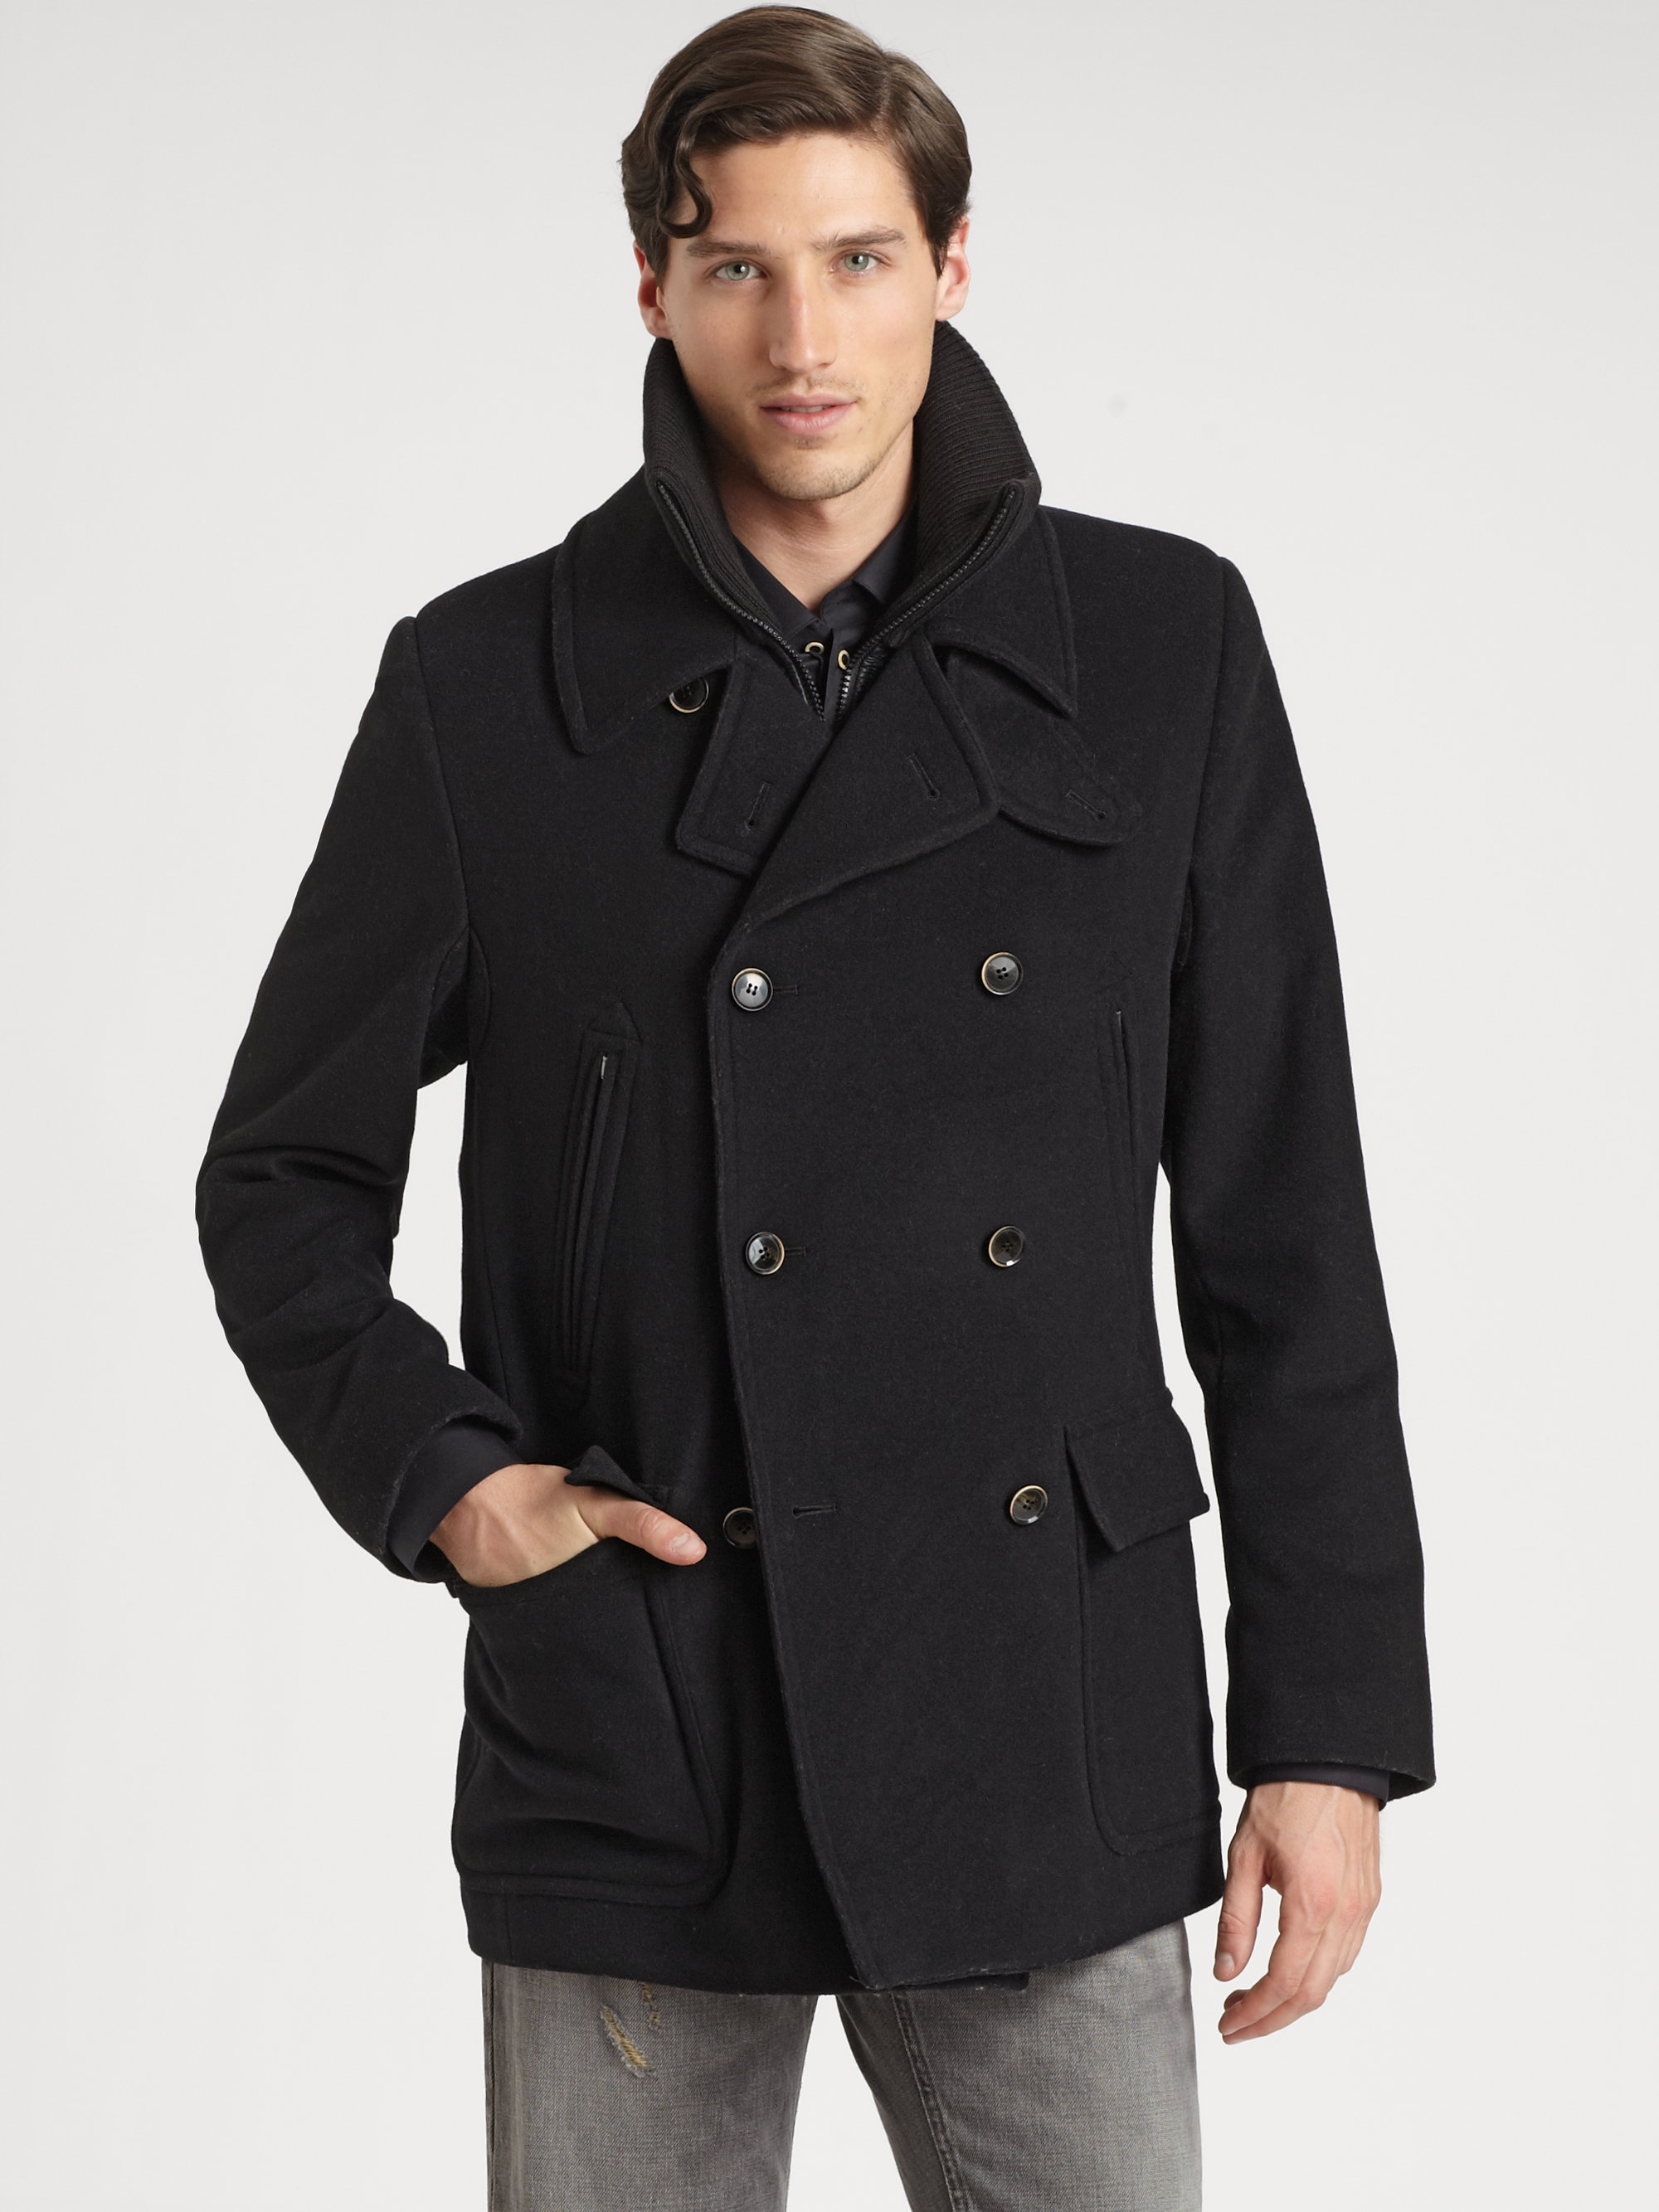 Dolce & gabbana Double Breasted Peacoat in Black for Men | Lyst